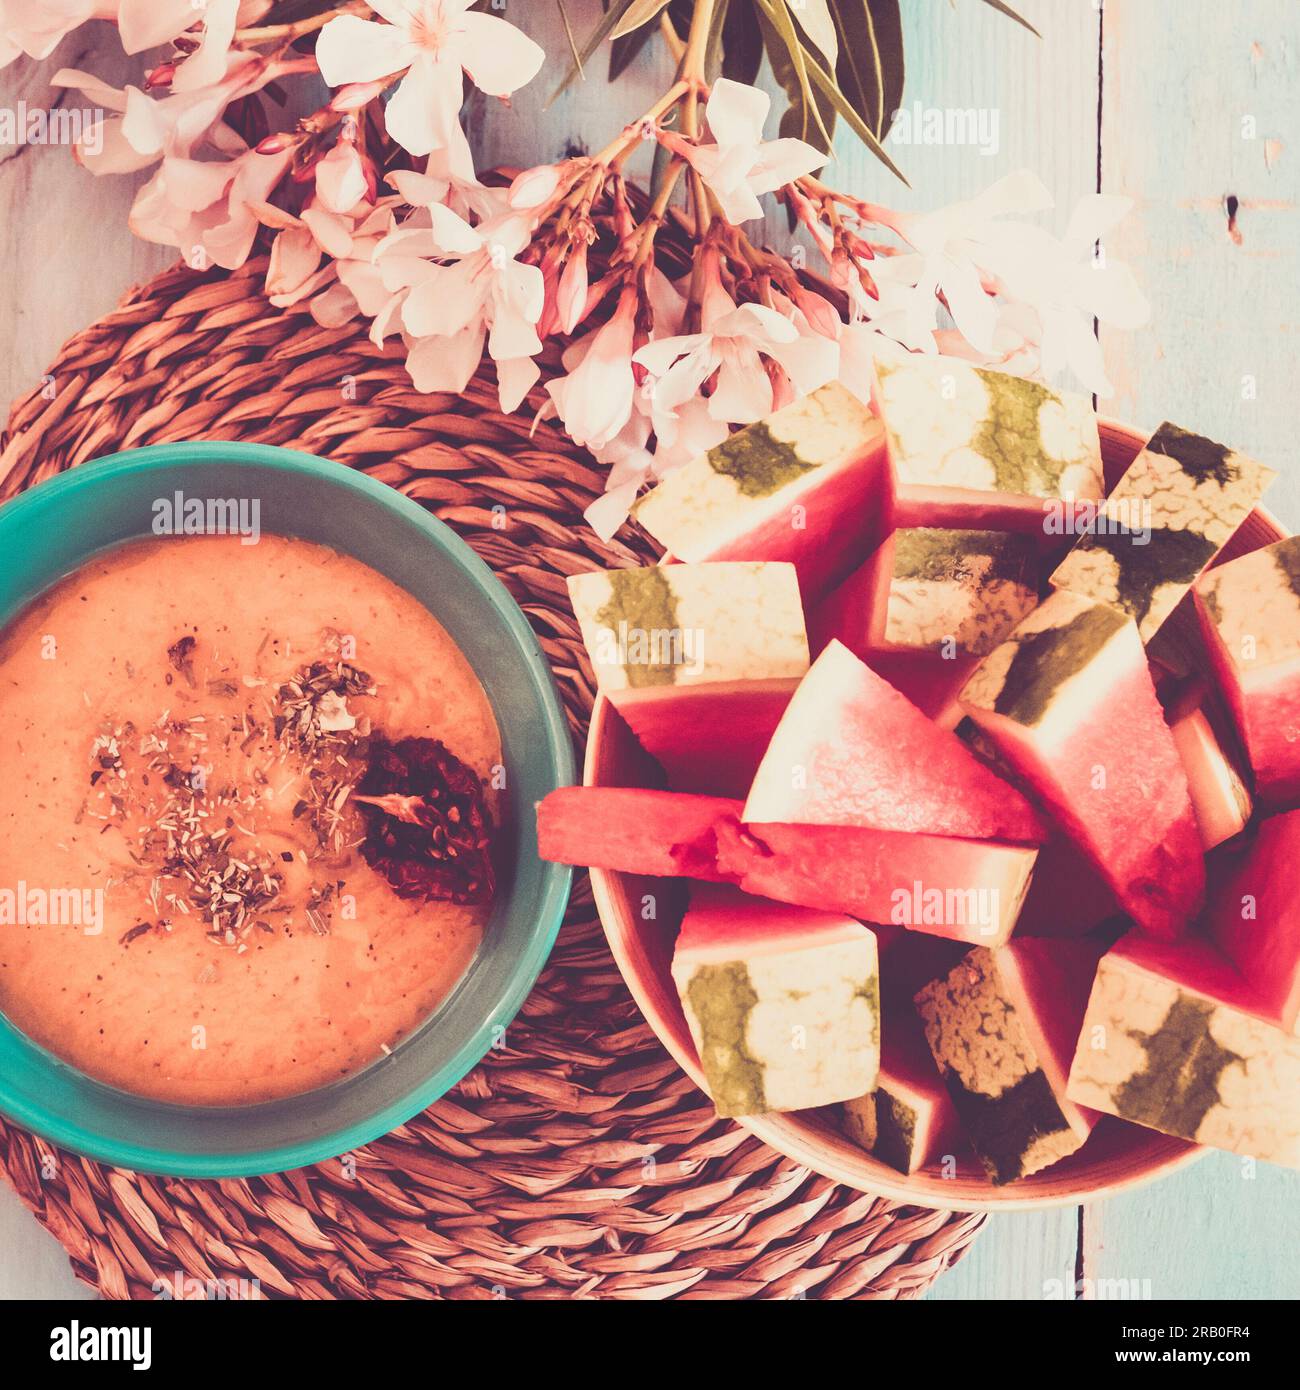 Top view composition of healthy food and lifestyle nutrition concept. Vegetarian and vegan vegetables soup with red watermelon fruit on a blue table ready for light lunch without calories. No people Stock Photo